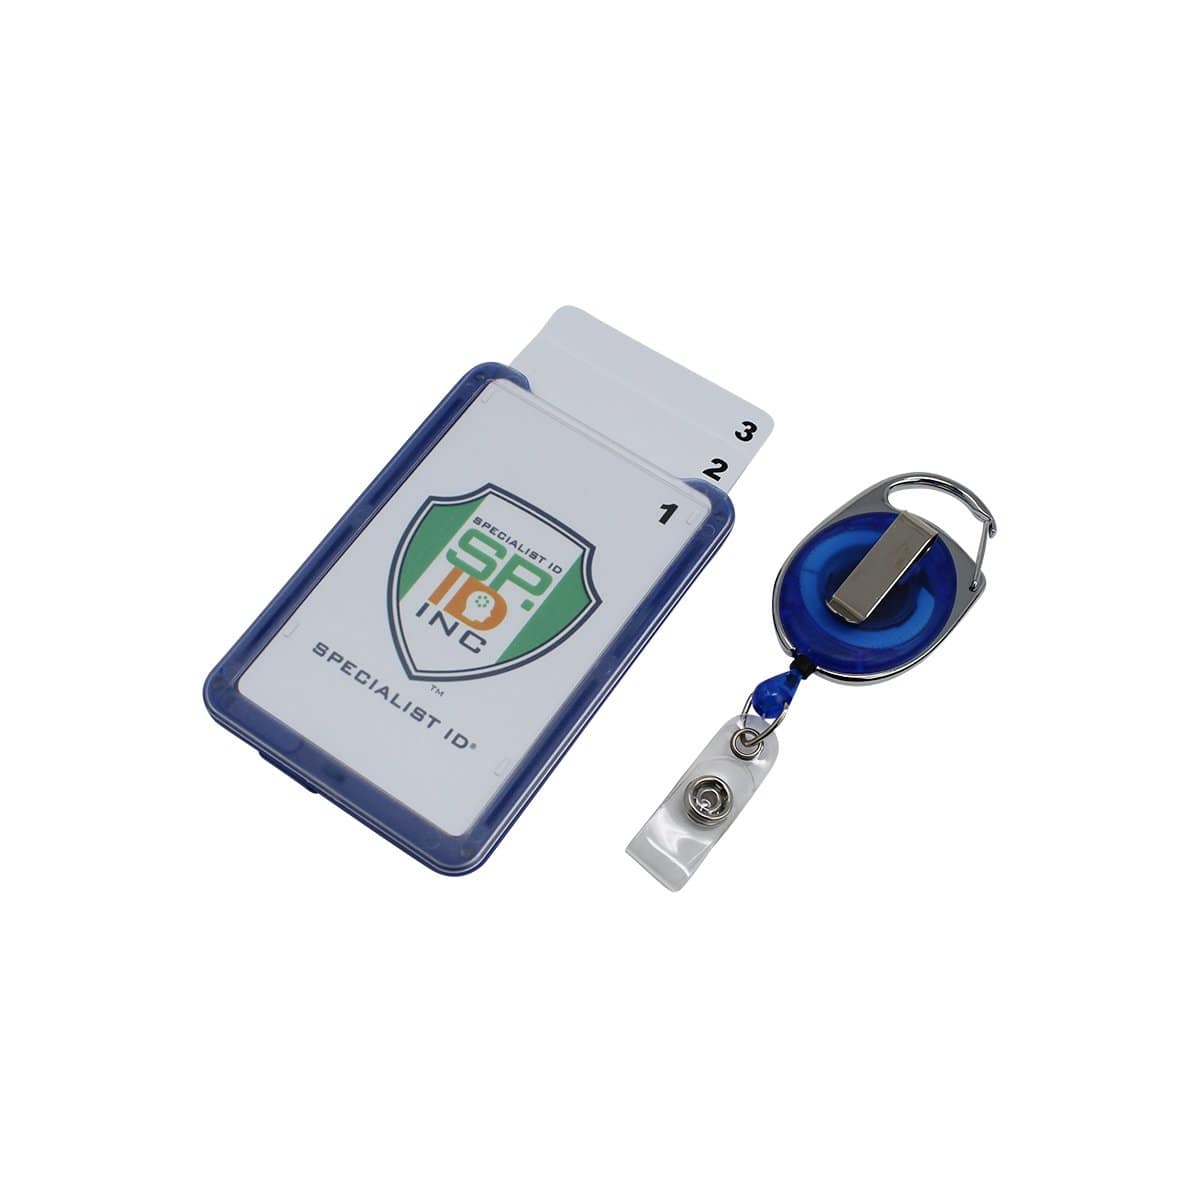 ID Badge Holder Retractable, Card Holder with Metal Dominican